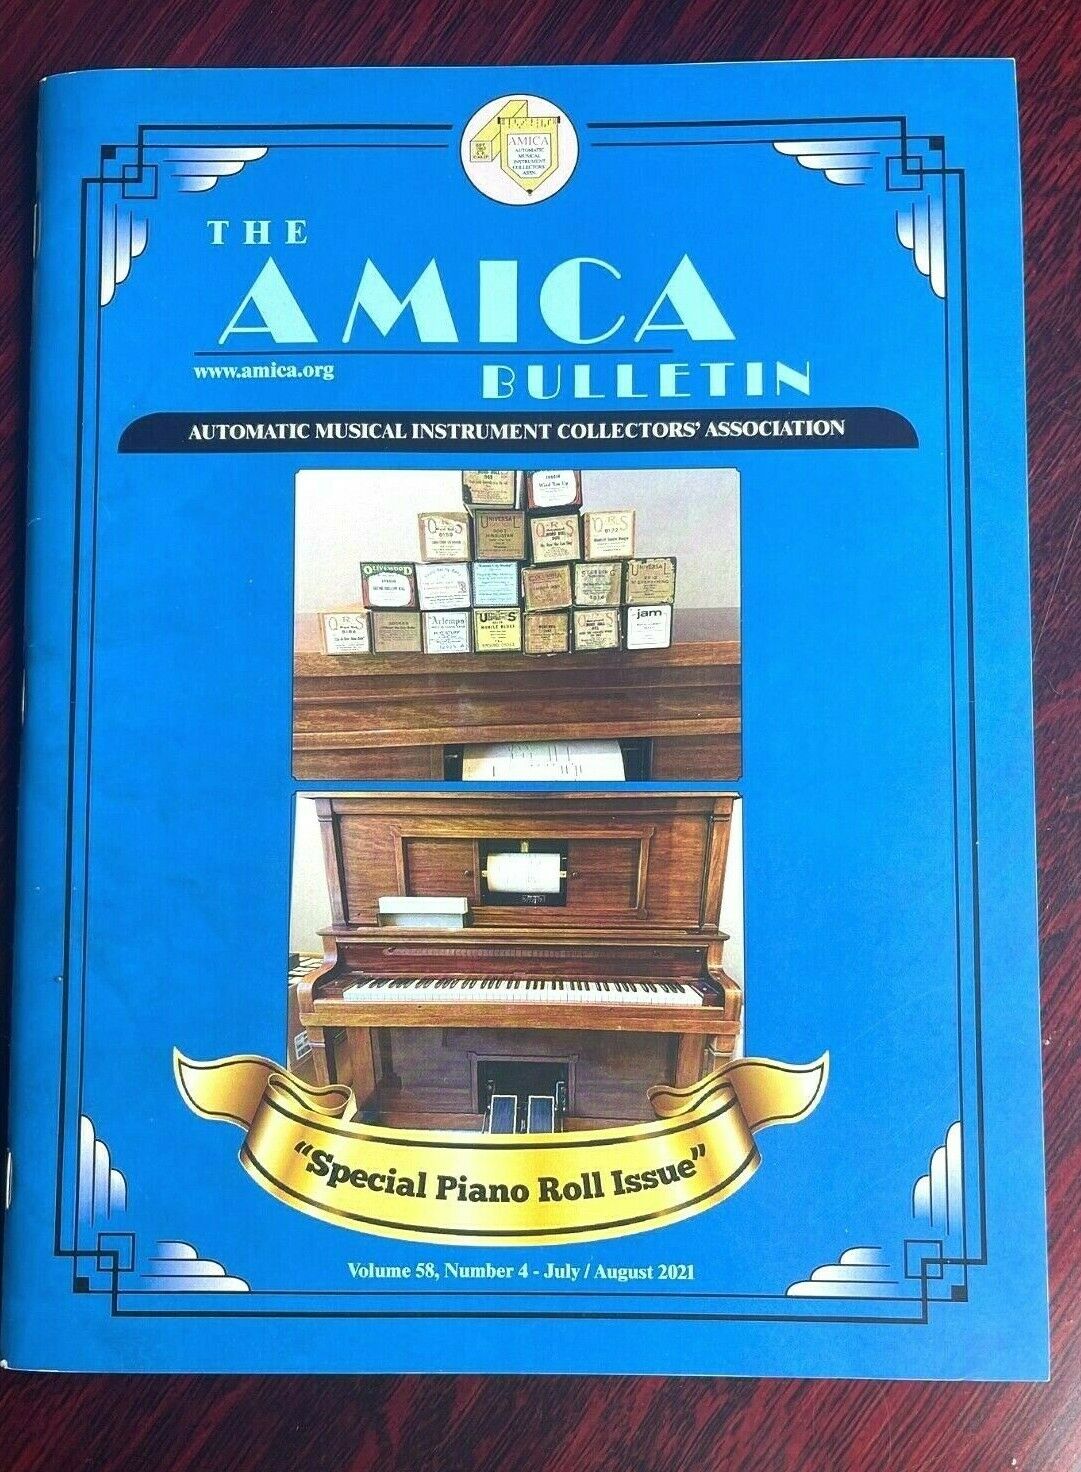 Amica Bulletin July- Aug 2021 Player Piano Nickelodeon Music Box Coin Op